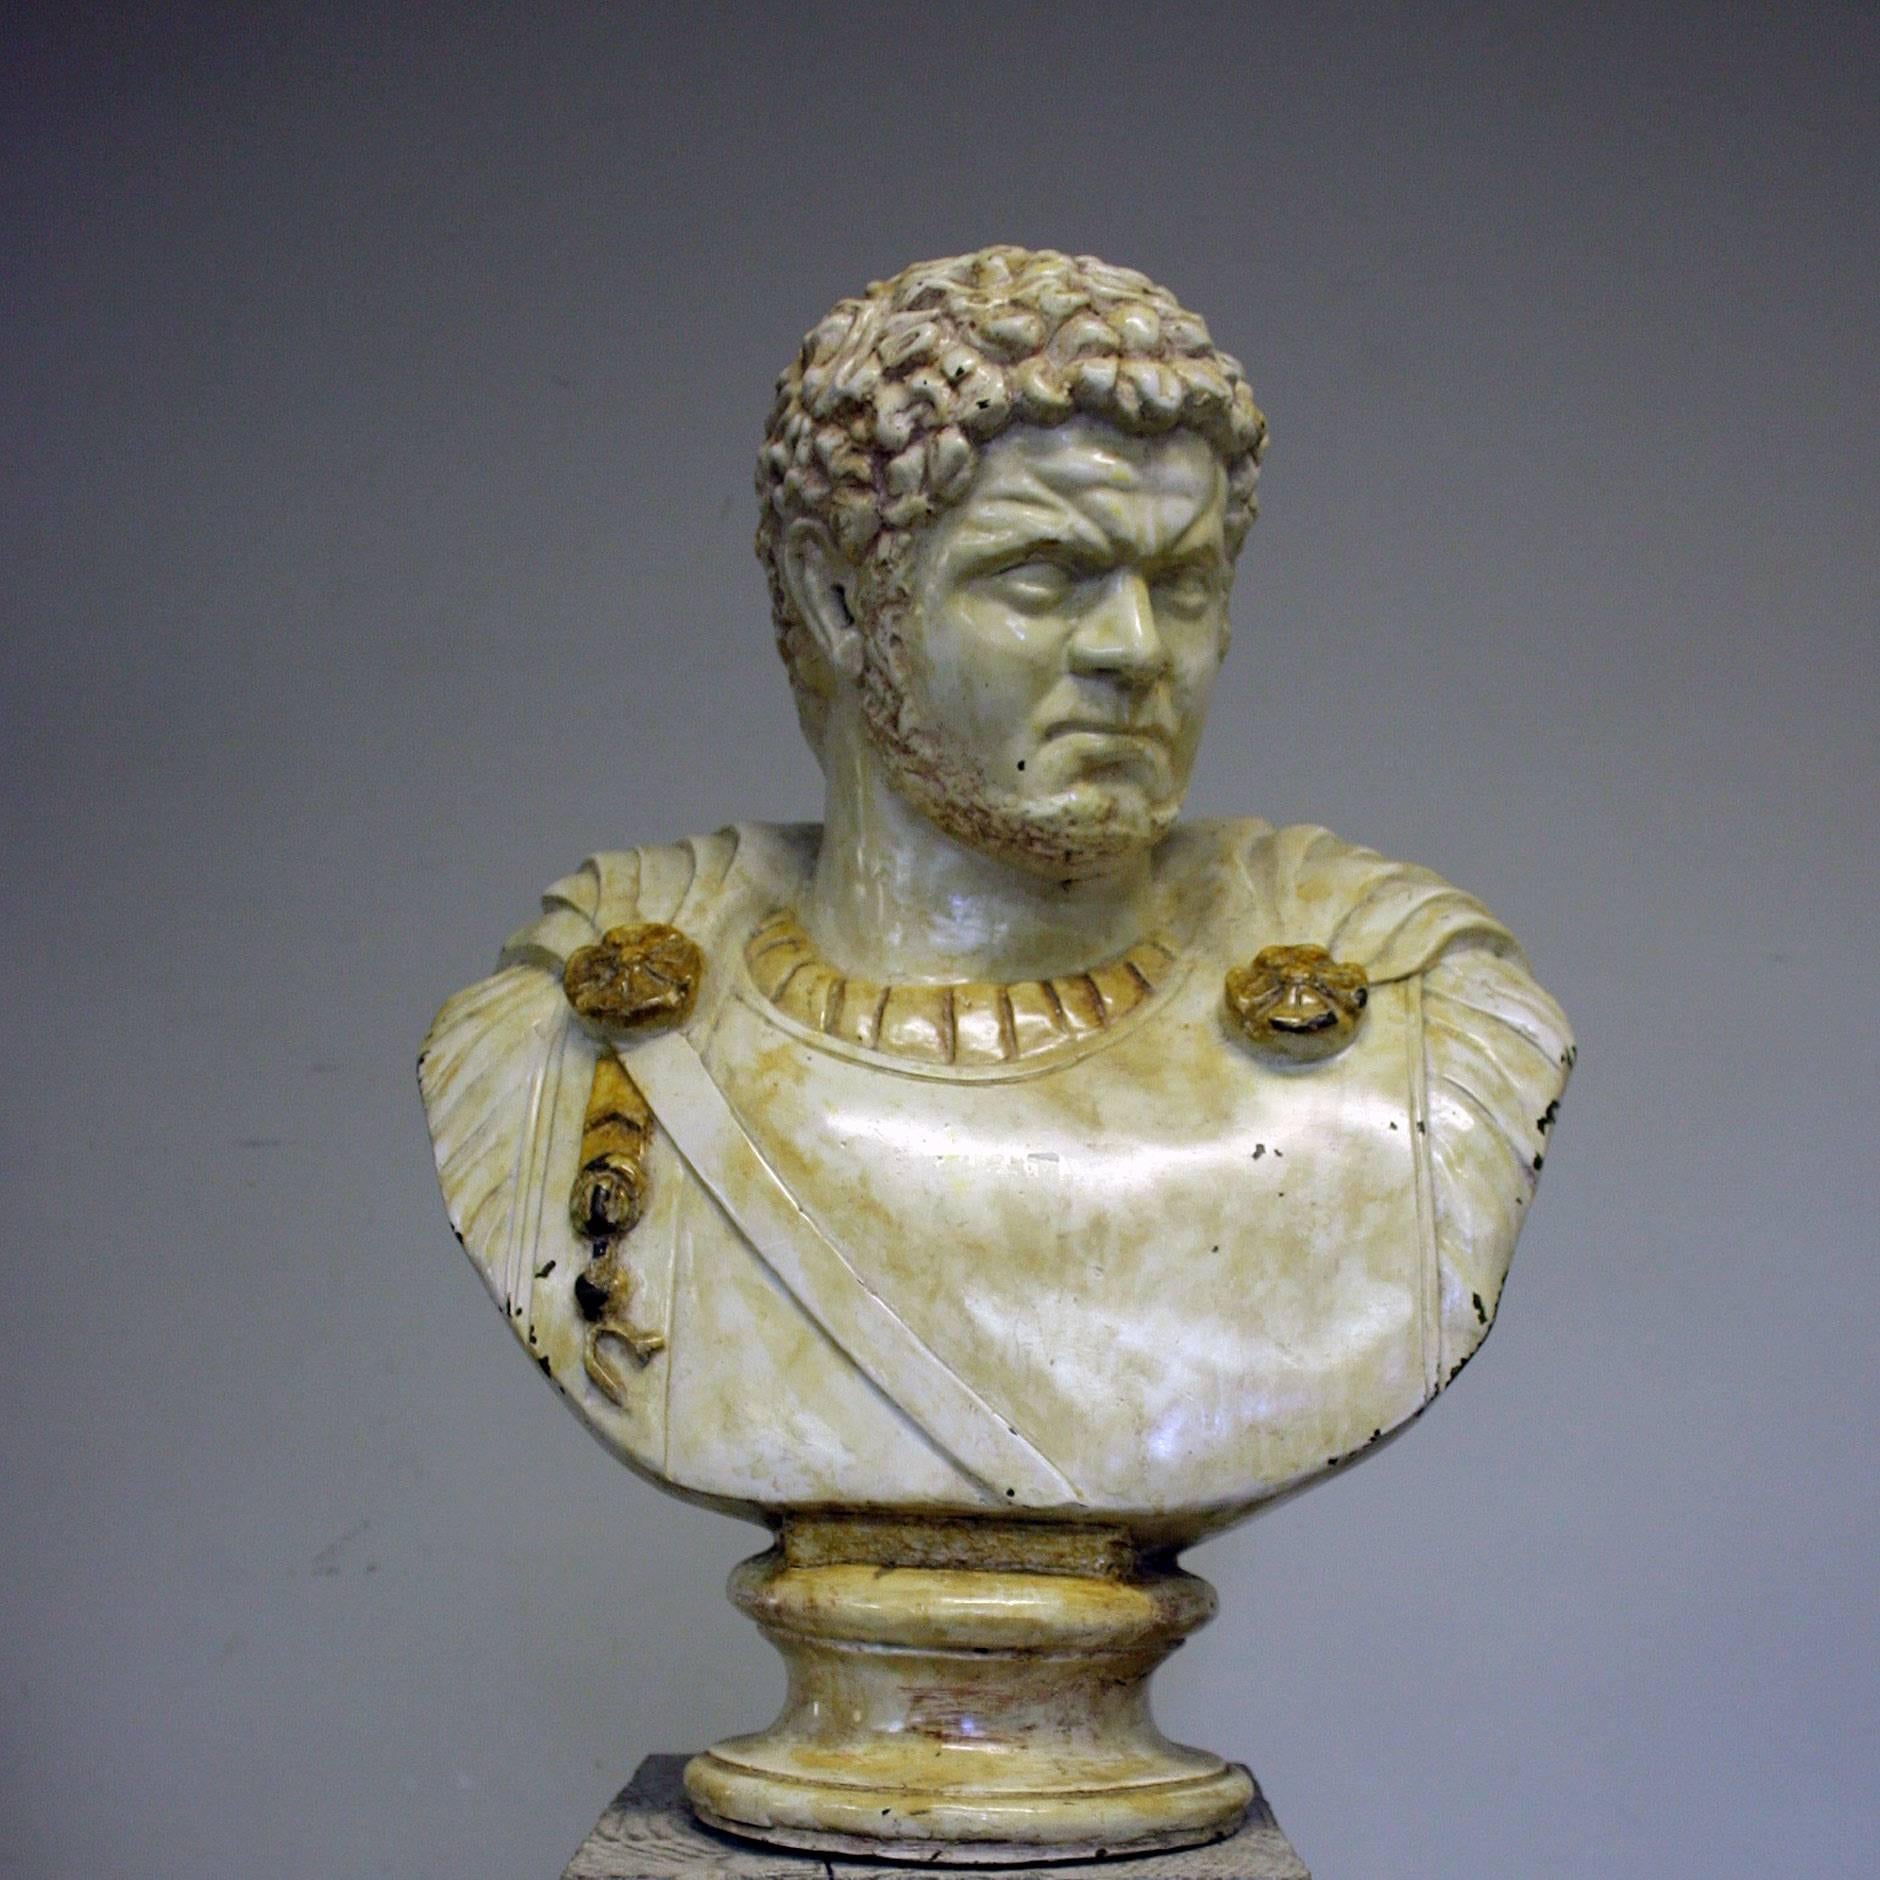 A large and impressive bronze and enamel mid-20th century Bust of Caracalla.

Some chips and discolouring to the enamel but all consistent with age, and just adds to the character of the bust.

Caracalla was the popular nickname of Antoninus (4